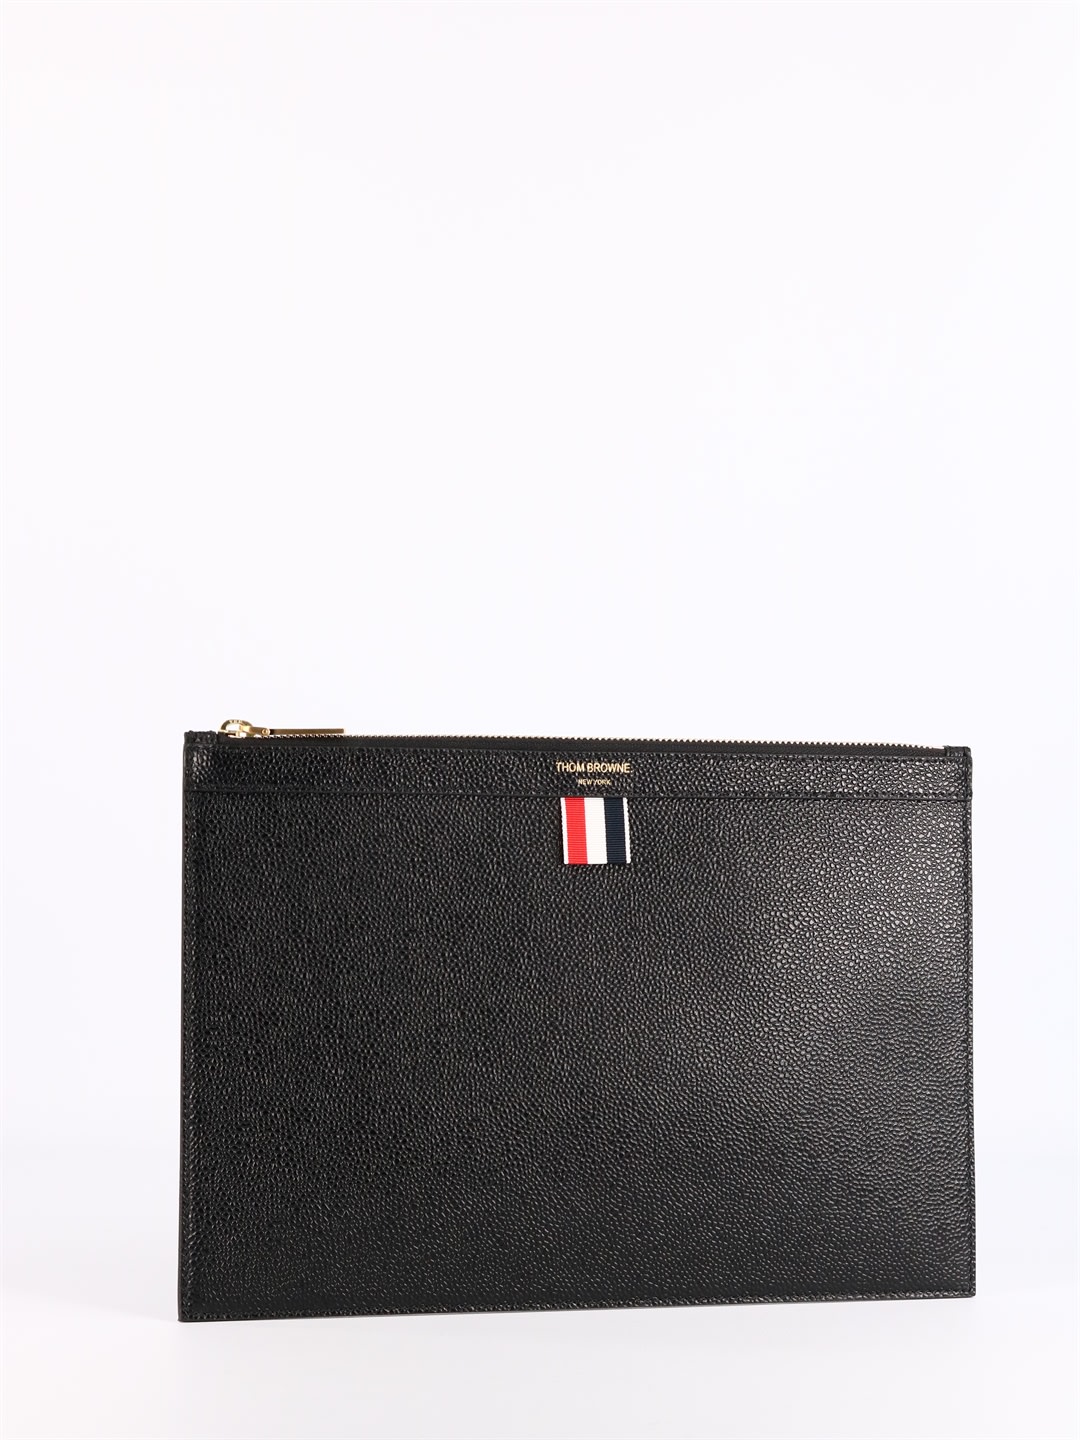 THOM BROWNE LEATHER DOCUMENT HOLDER